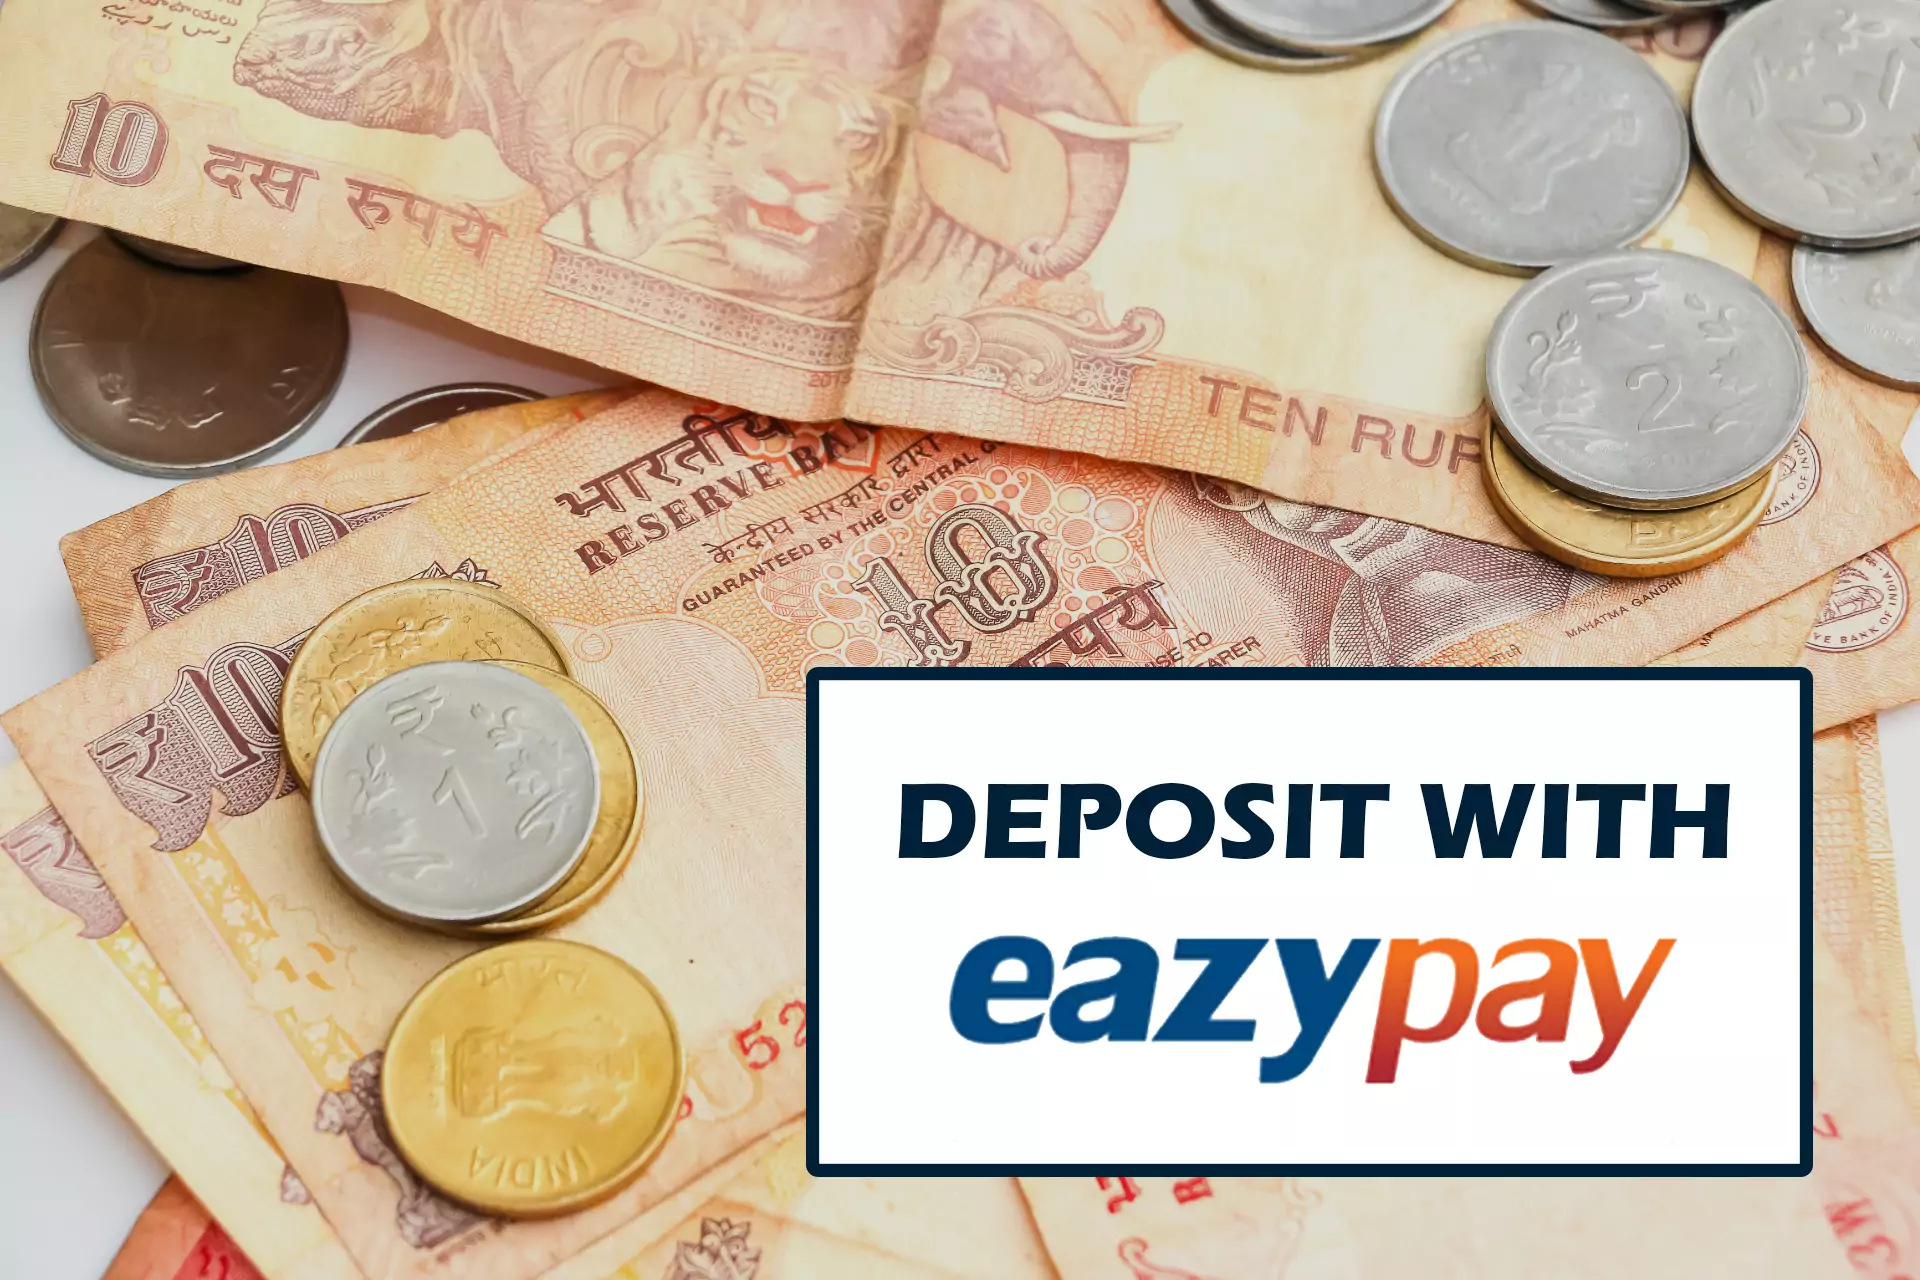 Try depositing with Eazypay if your bookmaker allows it.